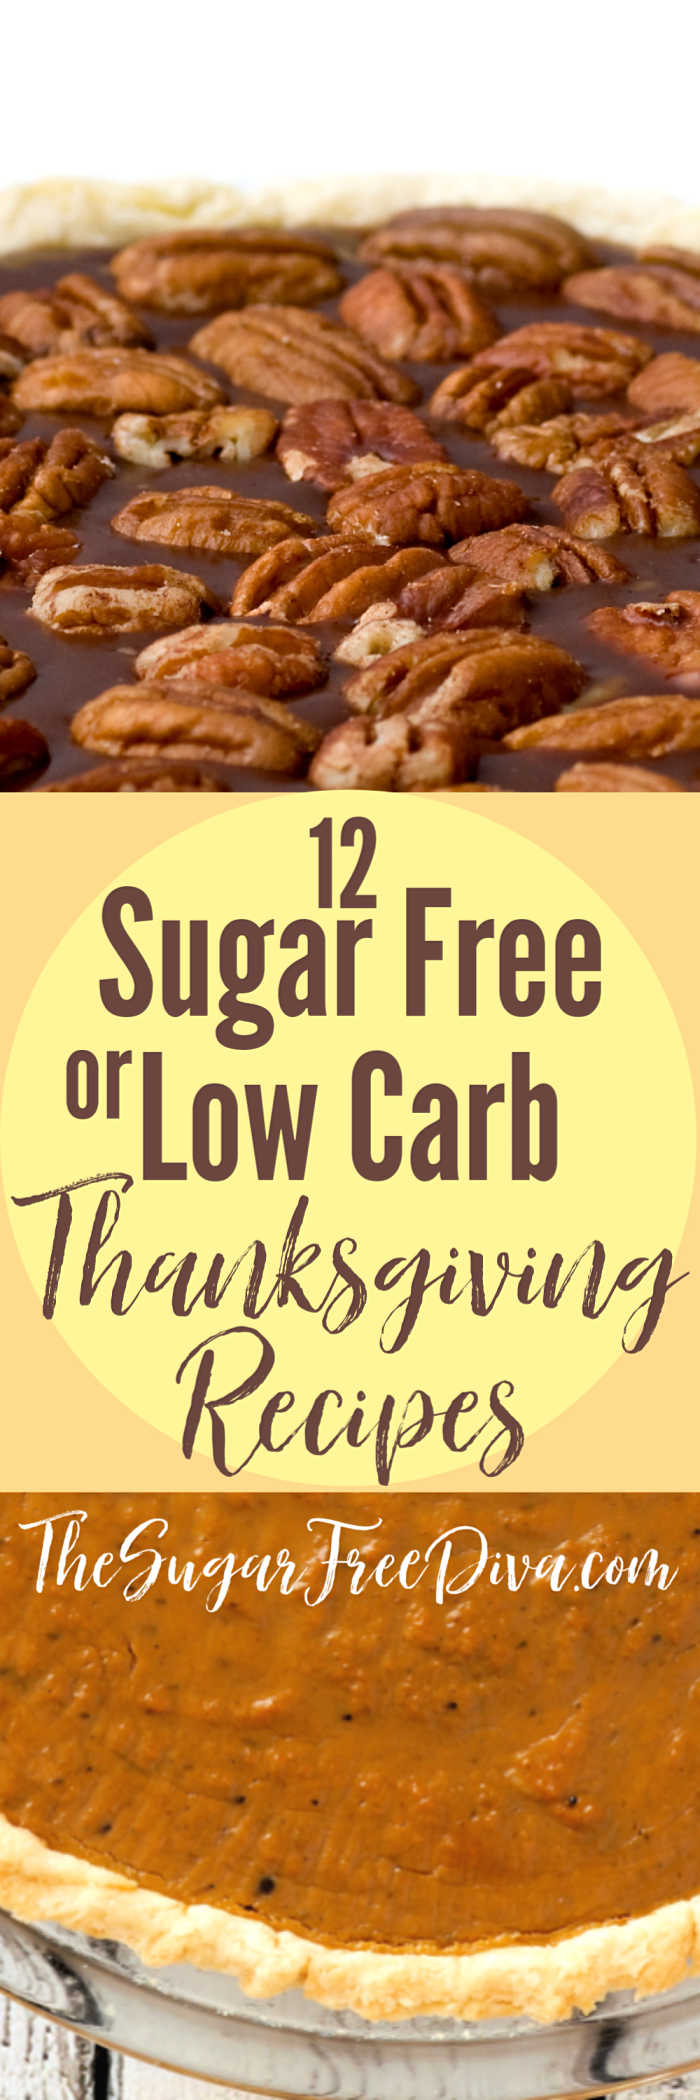 12 Great Low Carb or Sugar Free Recipes for Thanksgiving